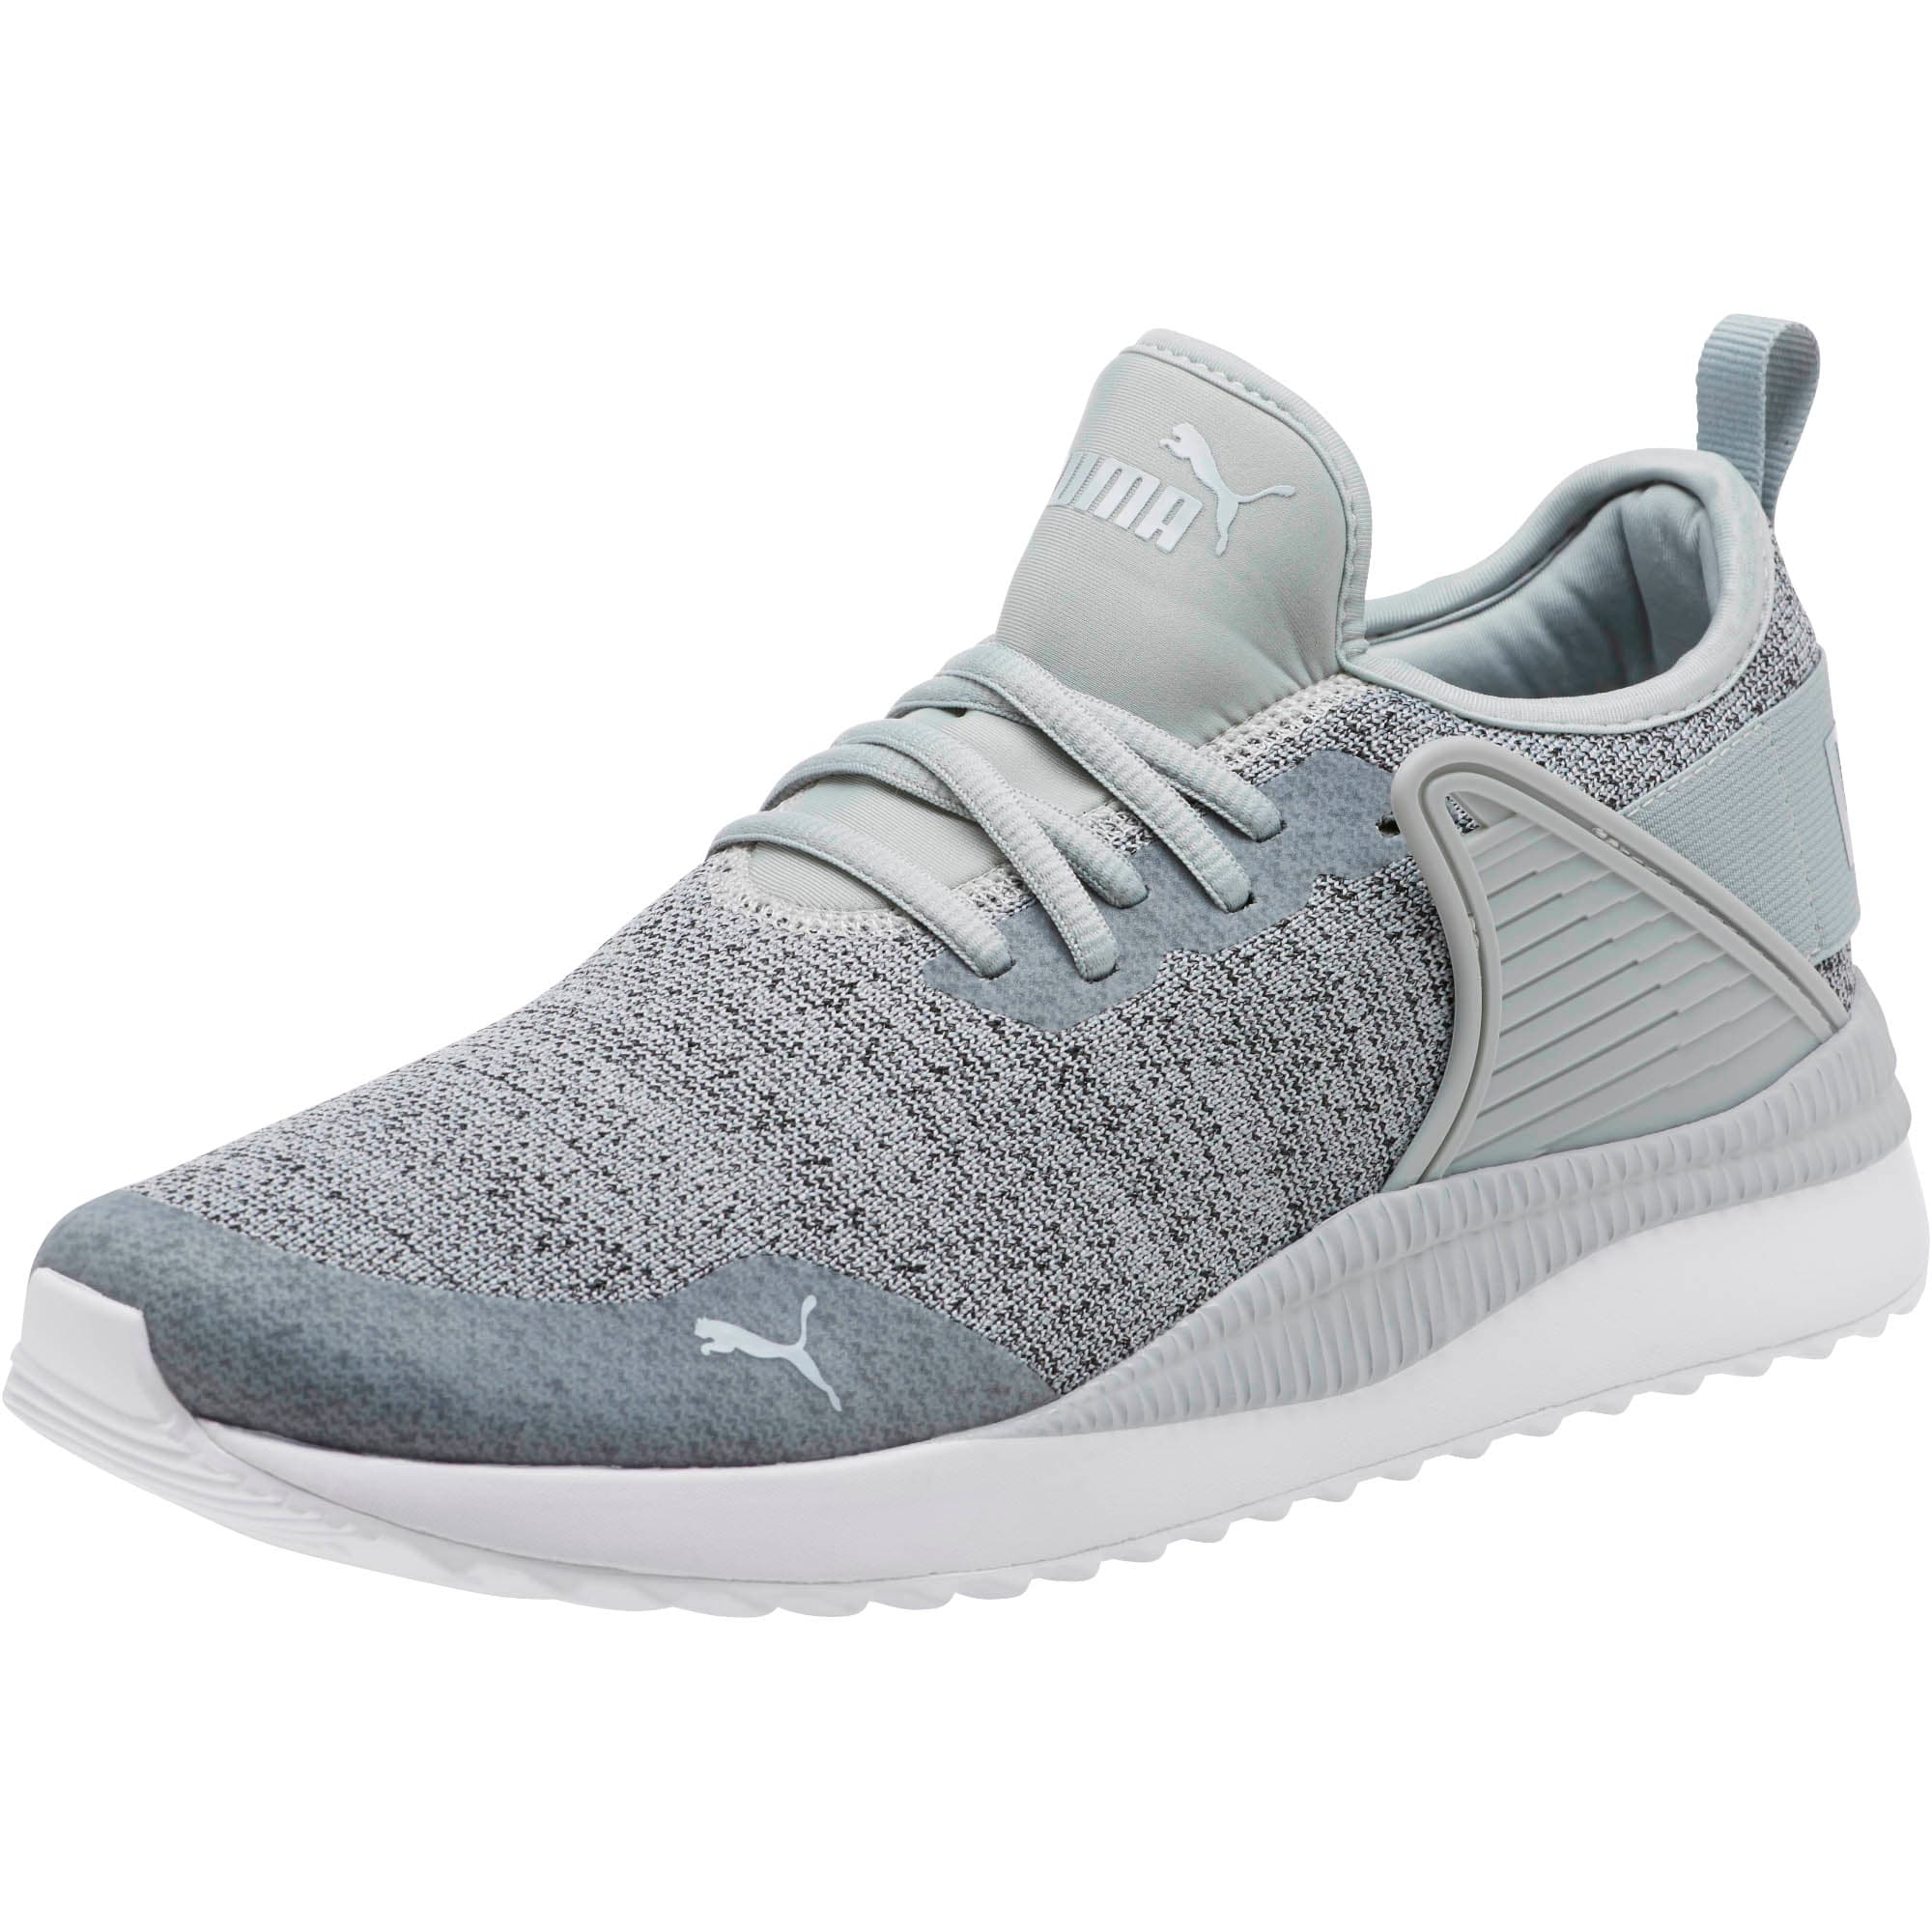 puma men's pacer next cage knit sneaker